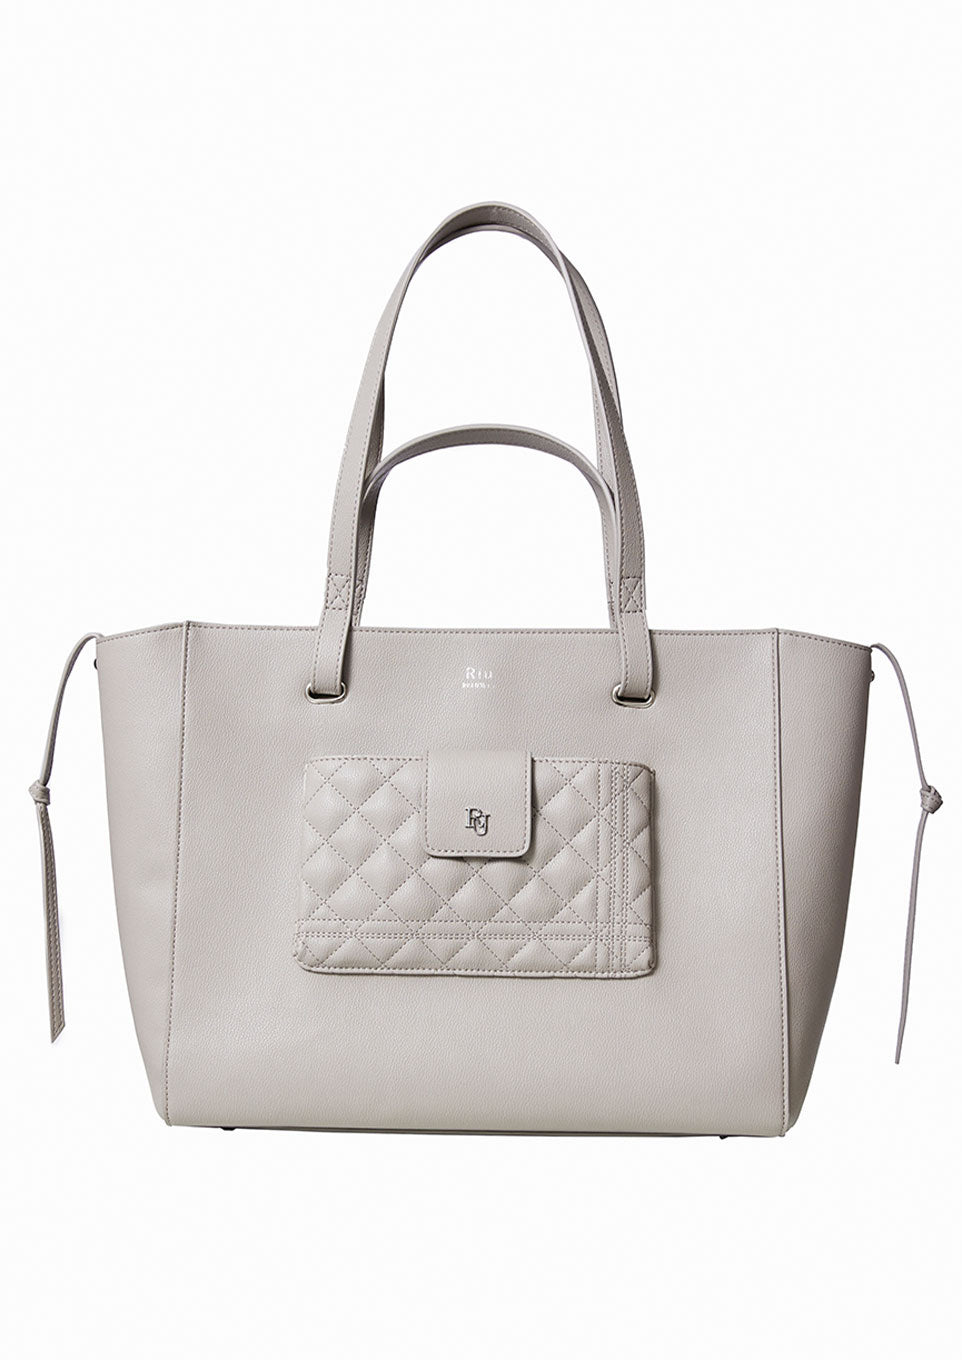 Synthetic leather tote bag